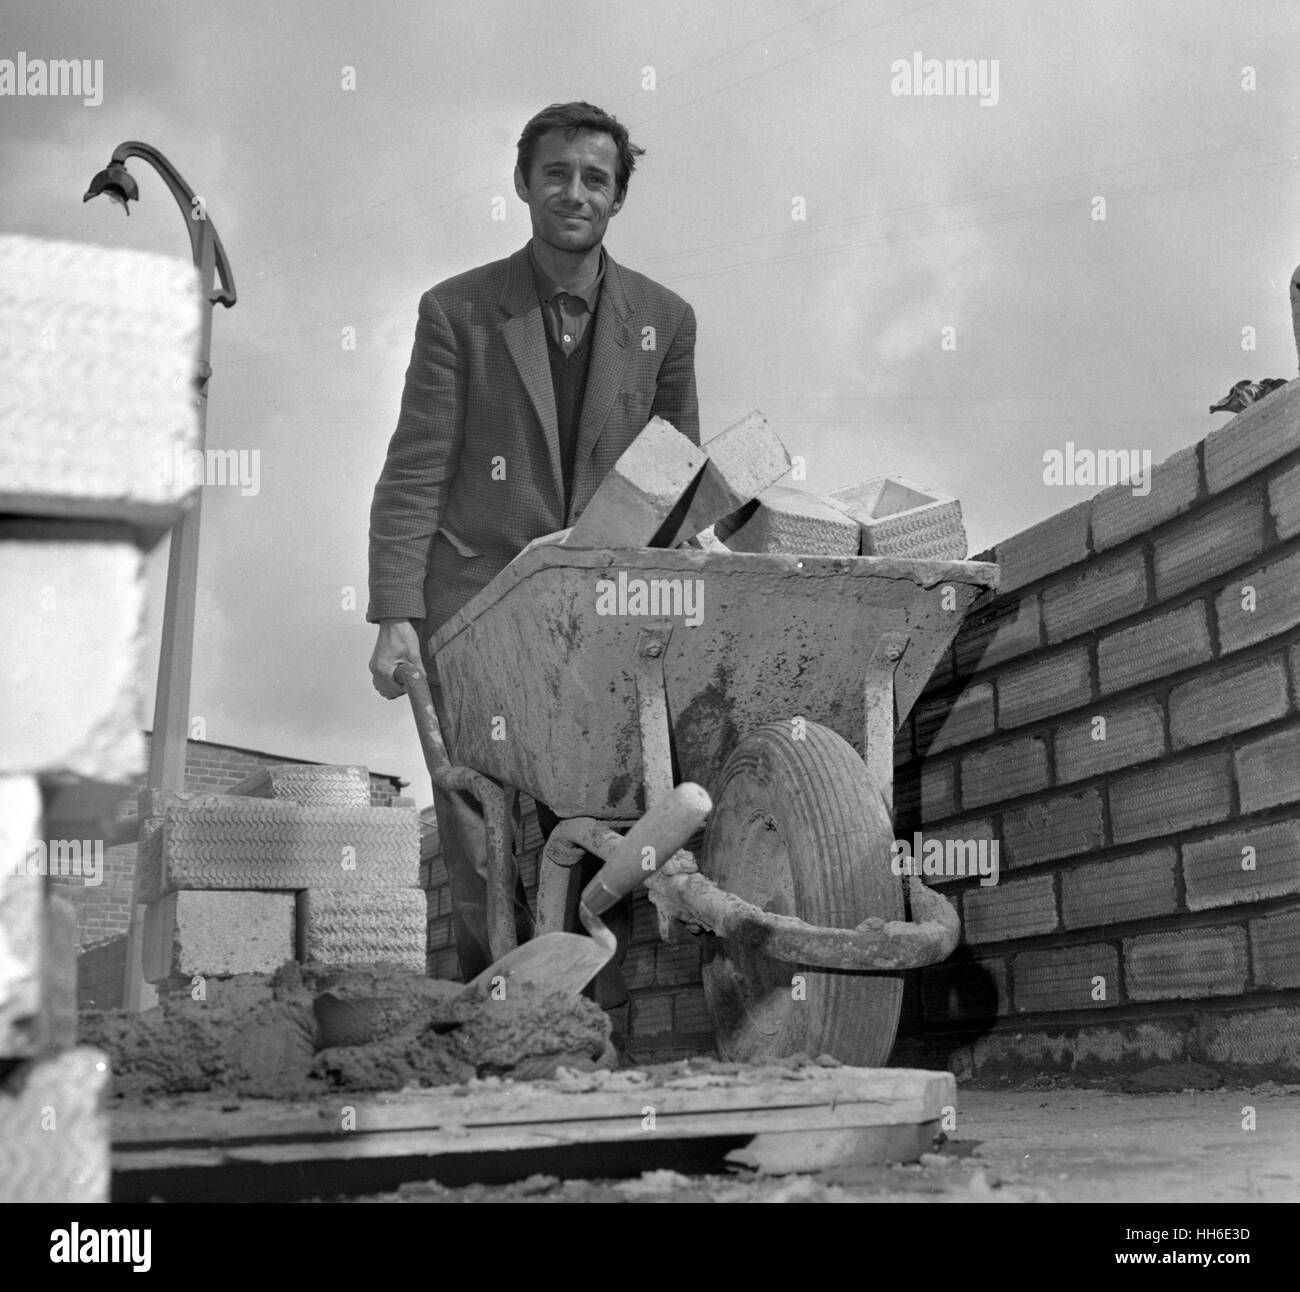 Surrounded by the tools of his trade is 30-year-old bricklayer Norman Jackson, who is to join as a student the university he helped to build. Norman, who lives in Hull, East Yorkshire, worked on the new science block extensions at University of Hull and now he has heard he has been successful in gaining a Ministry of Education Grant Scholarship to Hull. He will take a three-year English Literature course. Stock Photo